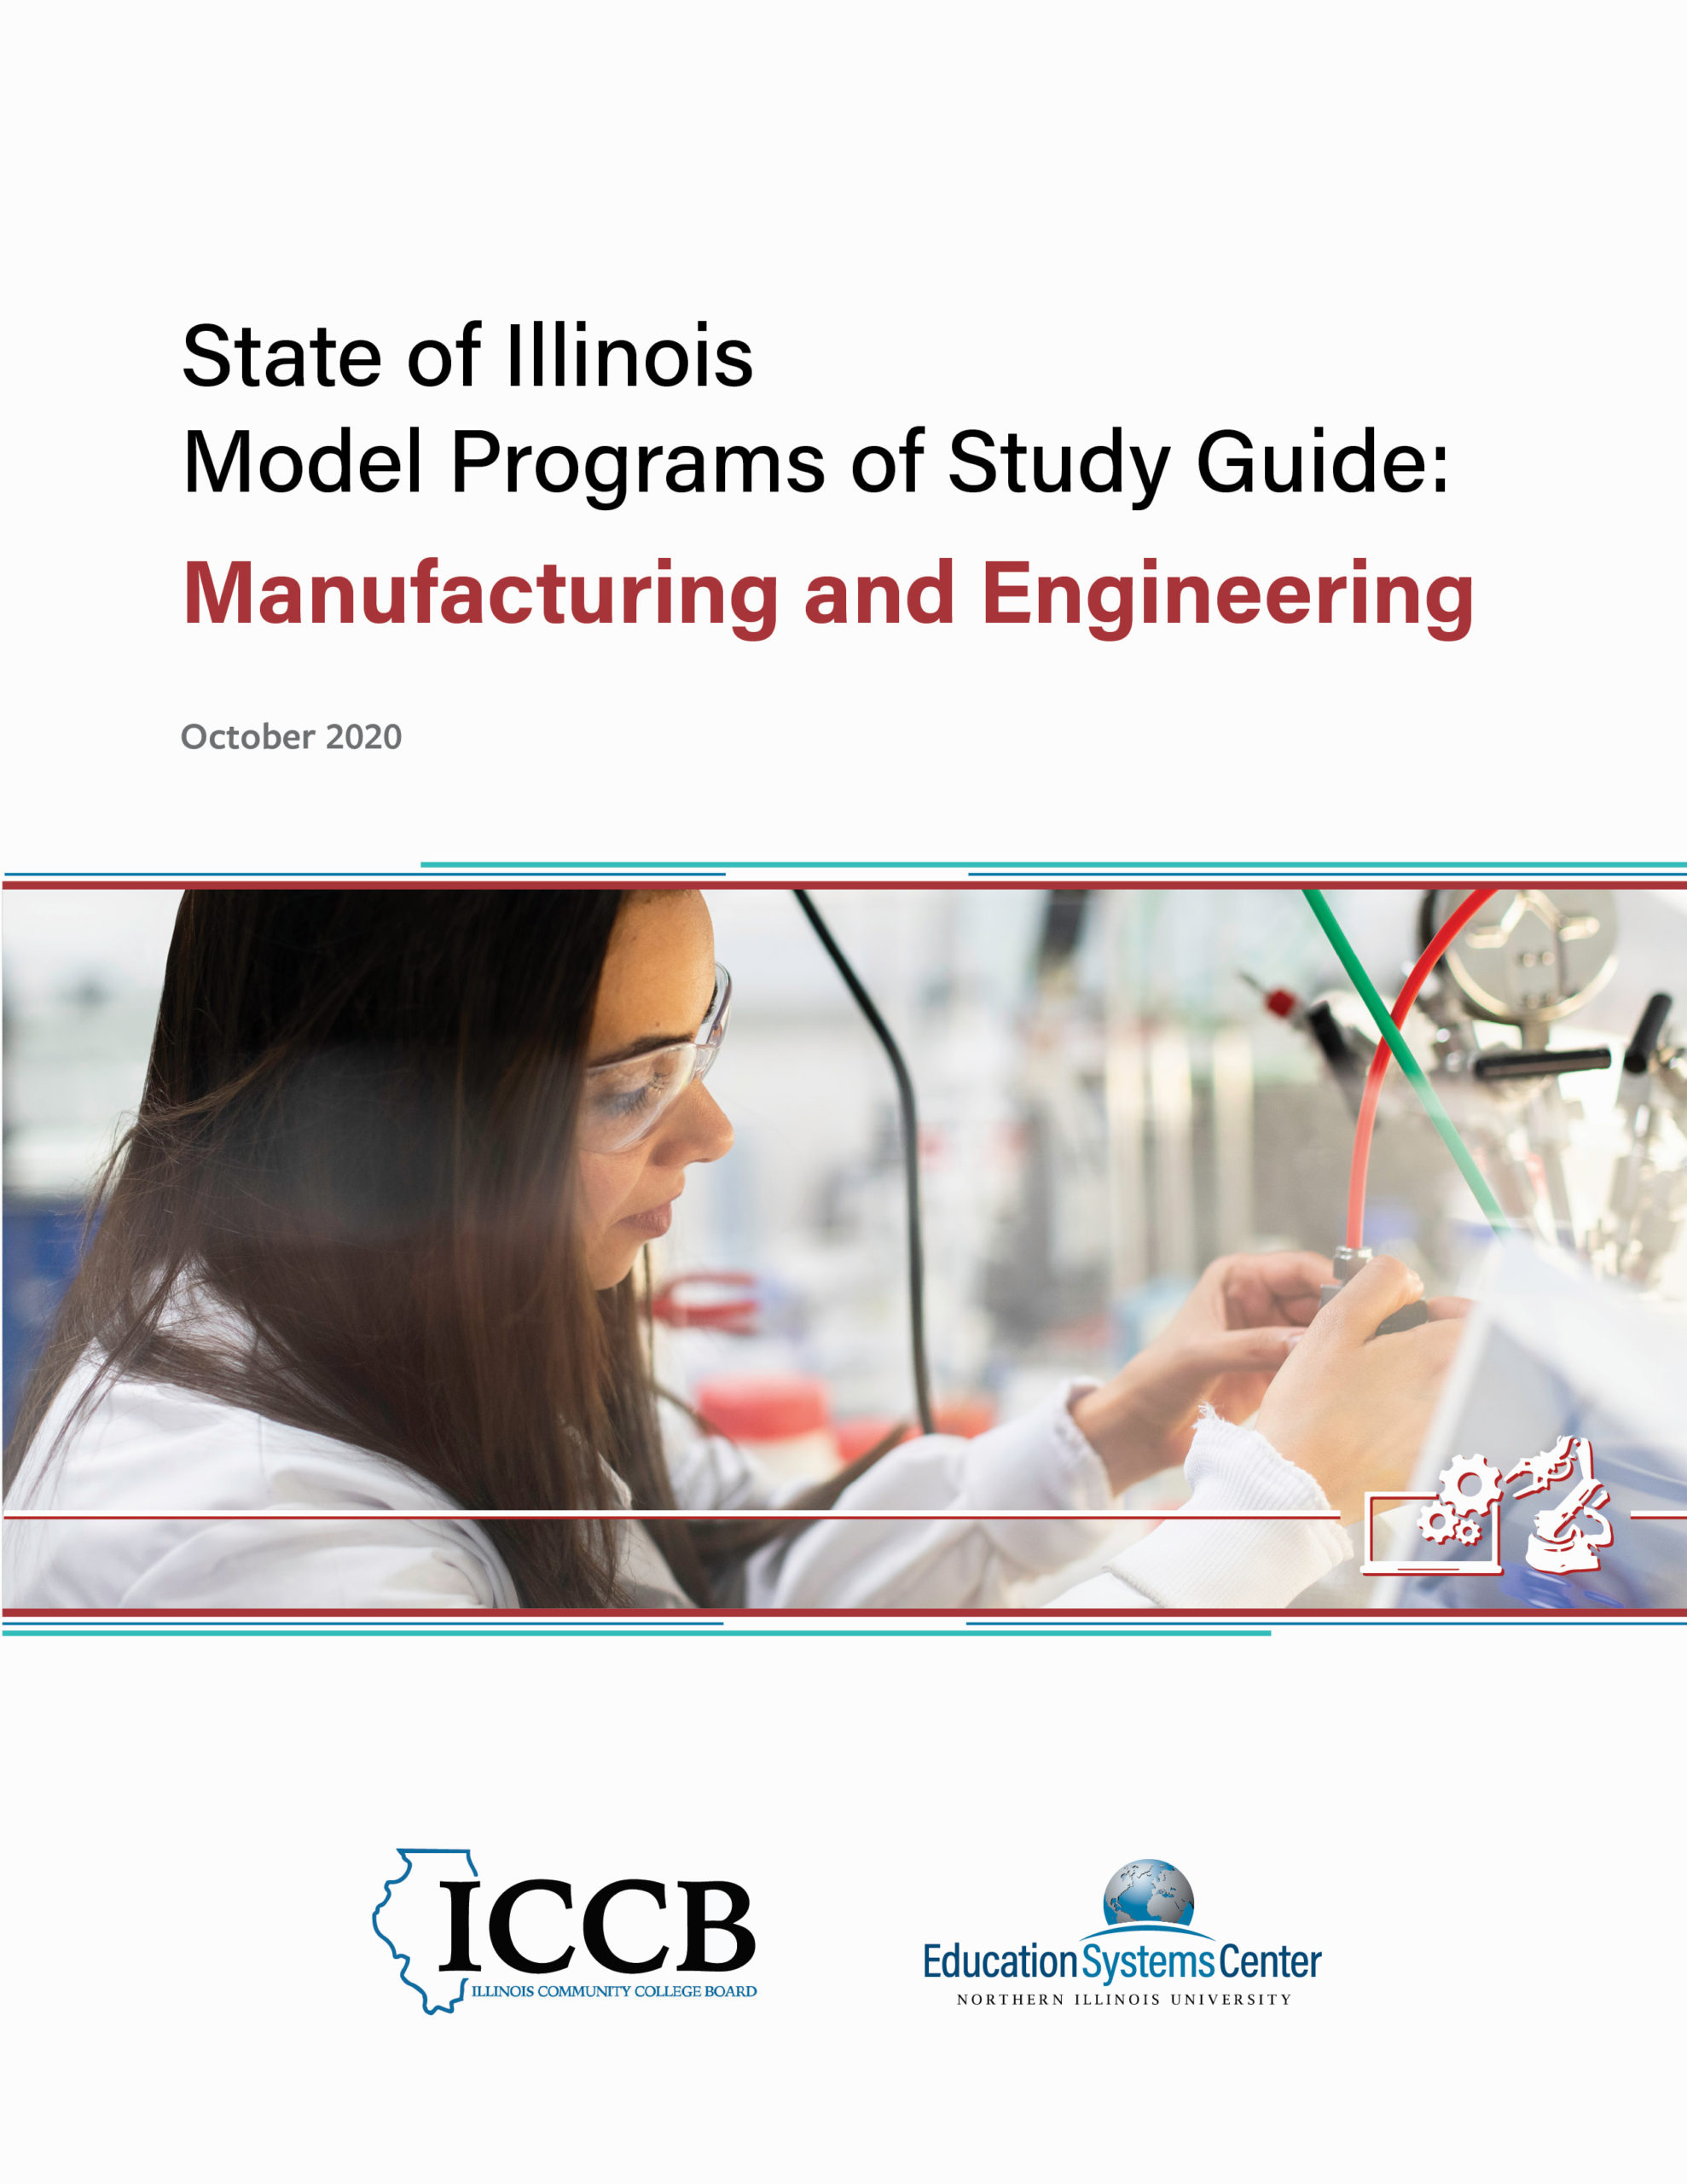 Report cover for "Model Programs of Study Guide - Manufacturing and Engineering" released October 2020 by Illinois Community College Board and Education Systems Center at Northern Illinois University